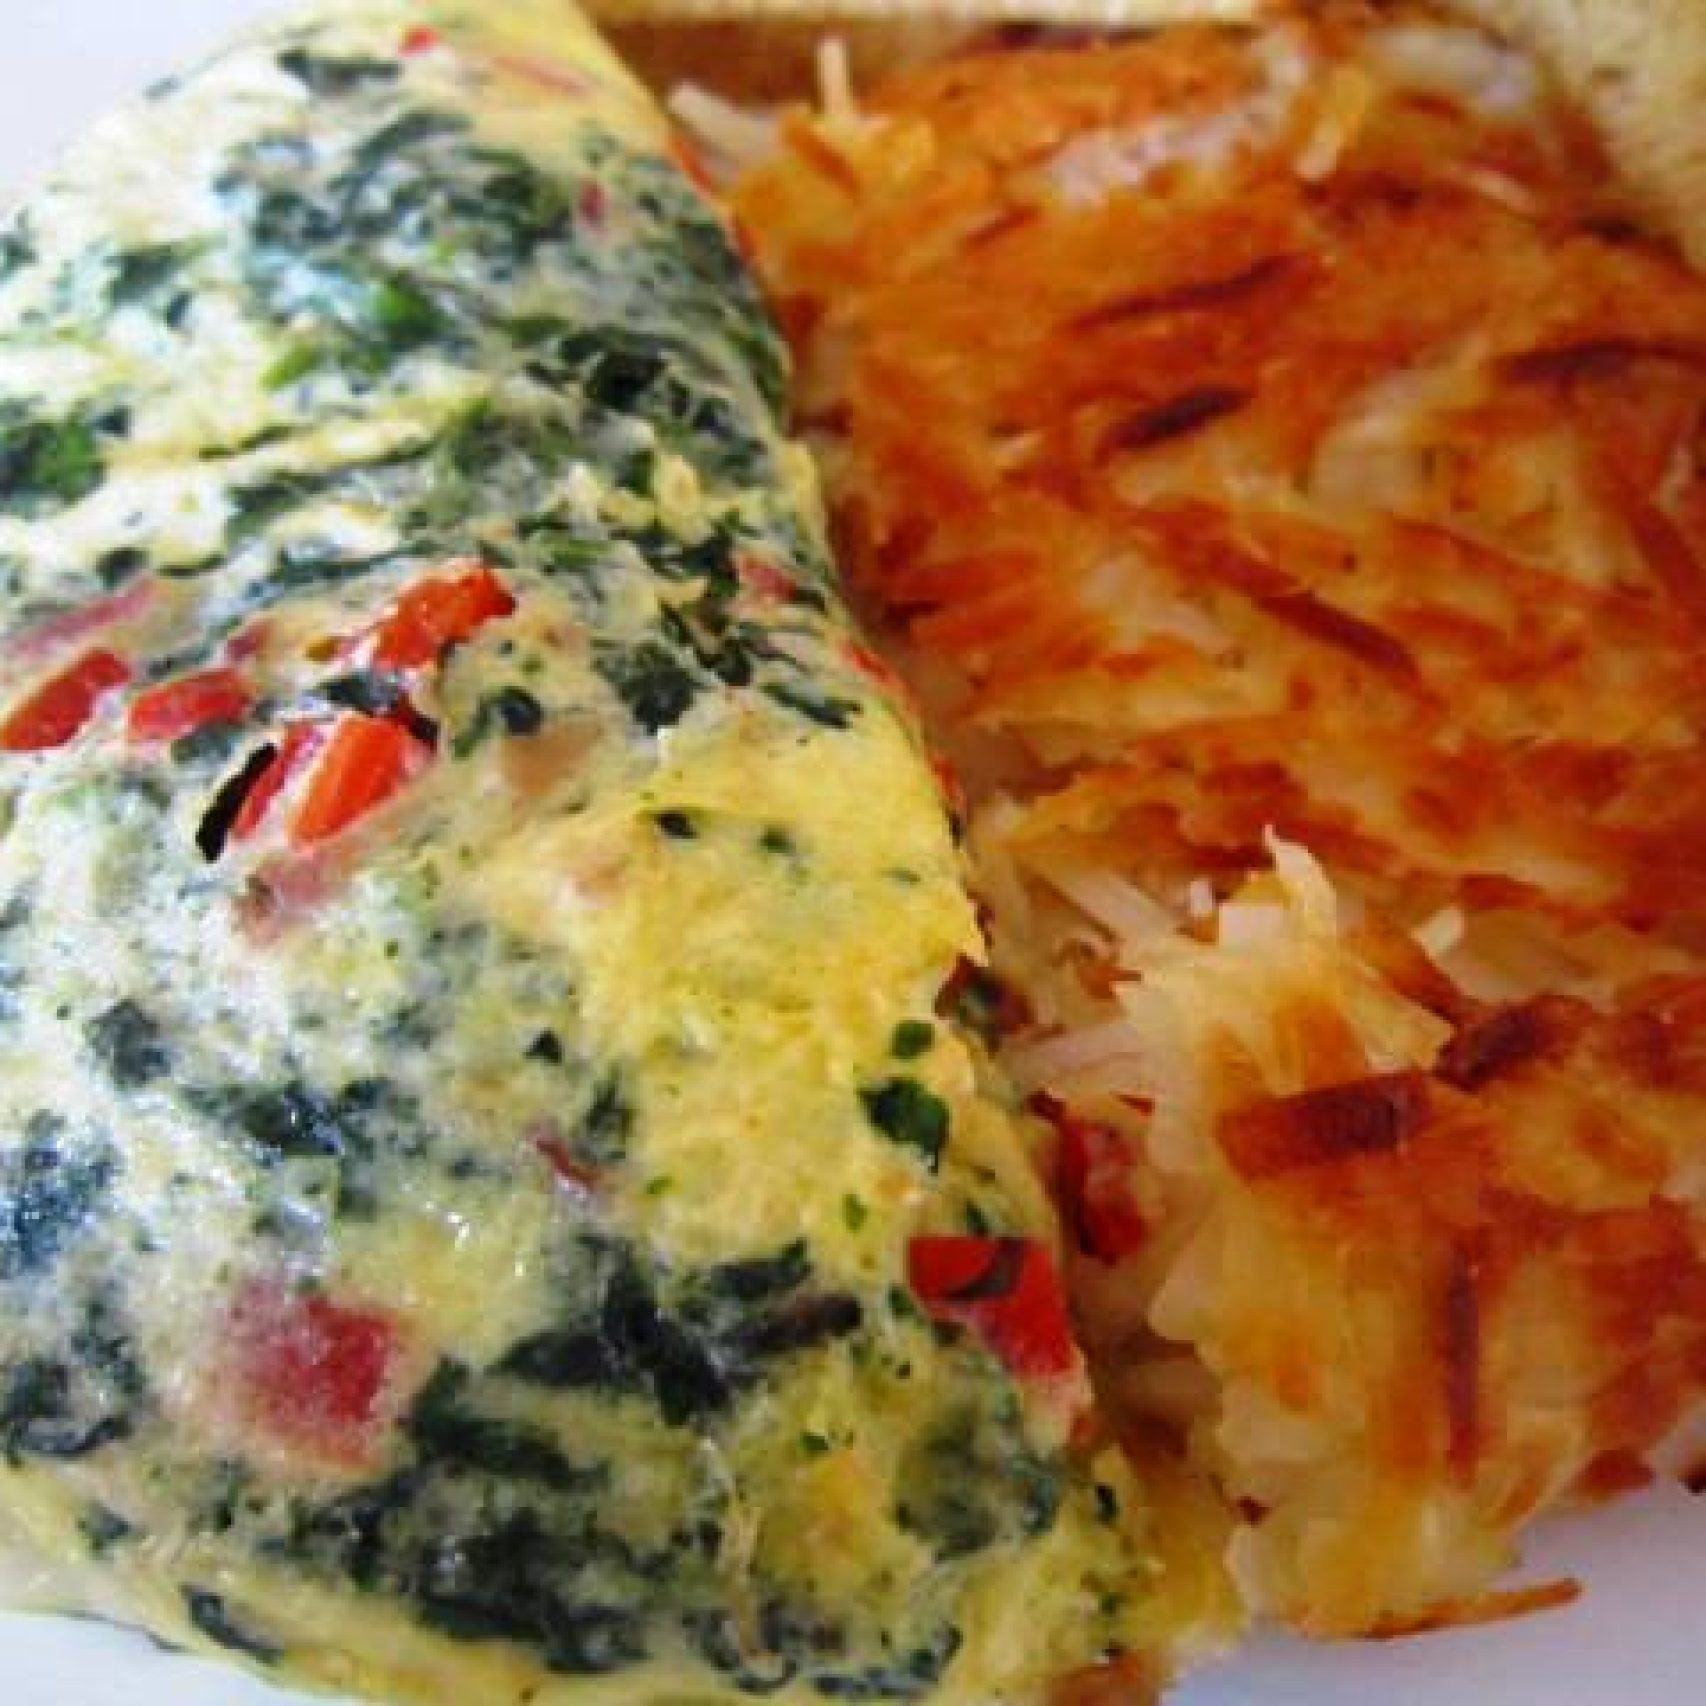 Oscar's florentine Omelet with Hash Browns - take out